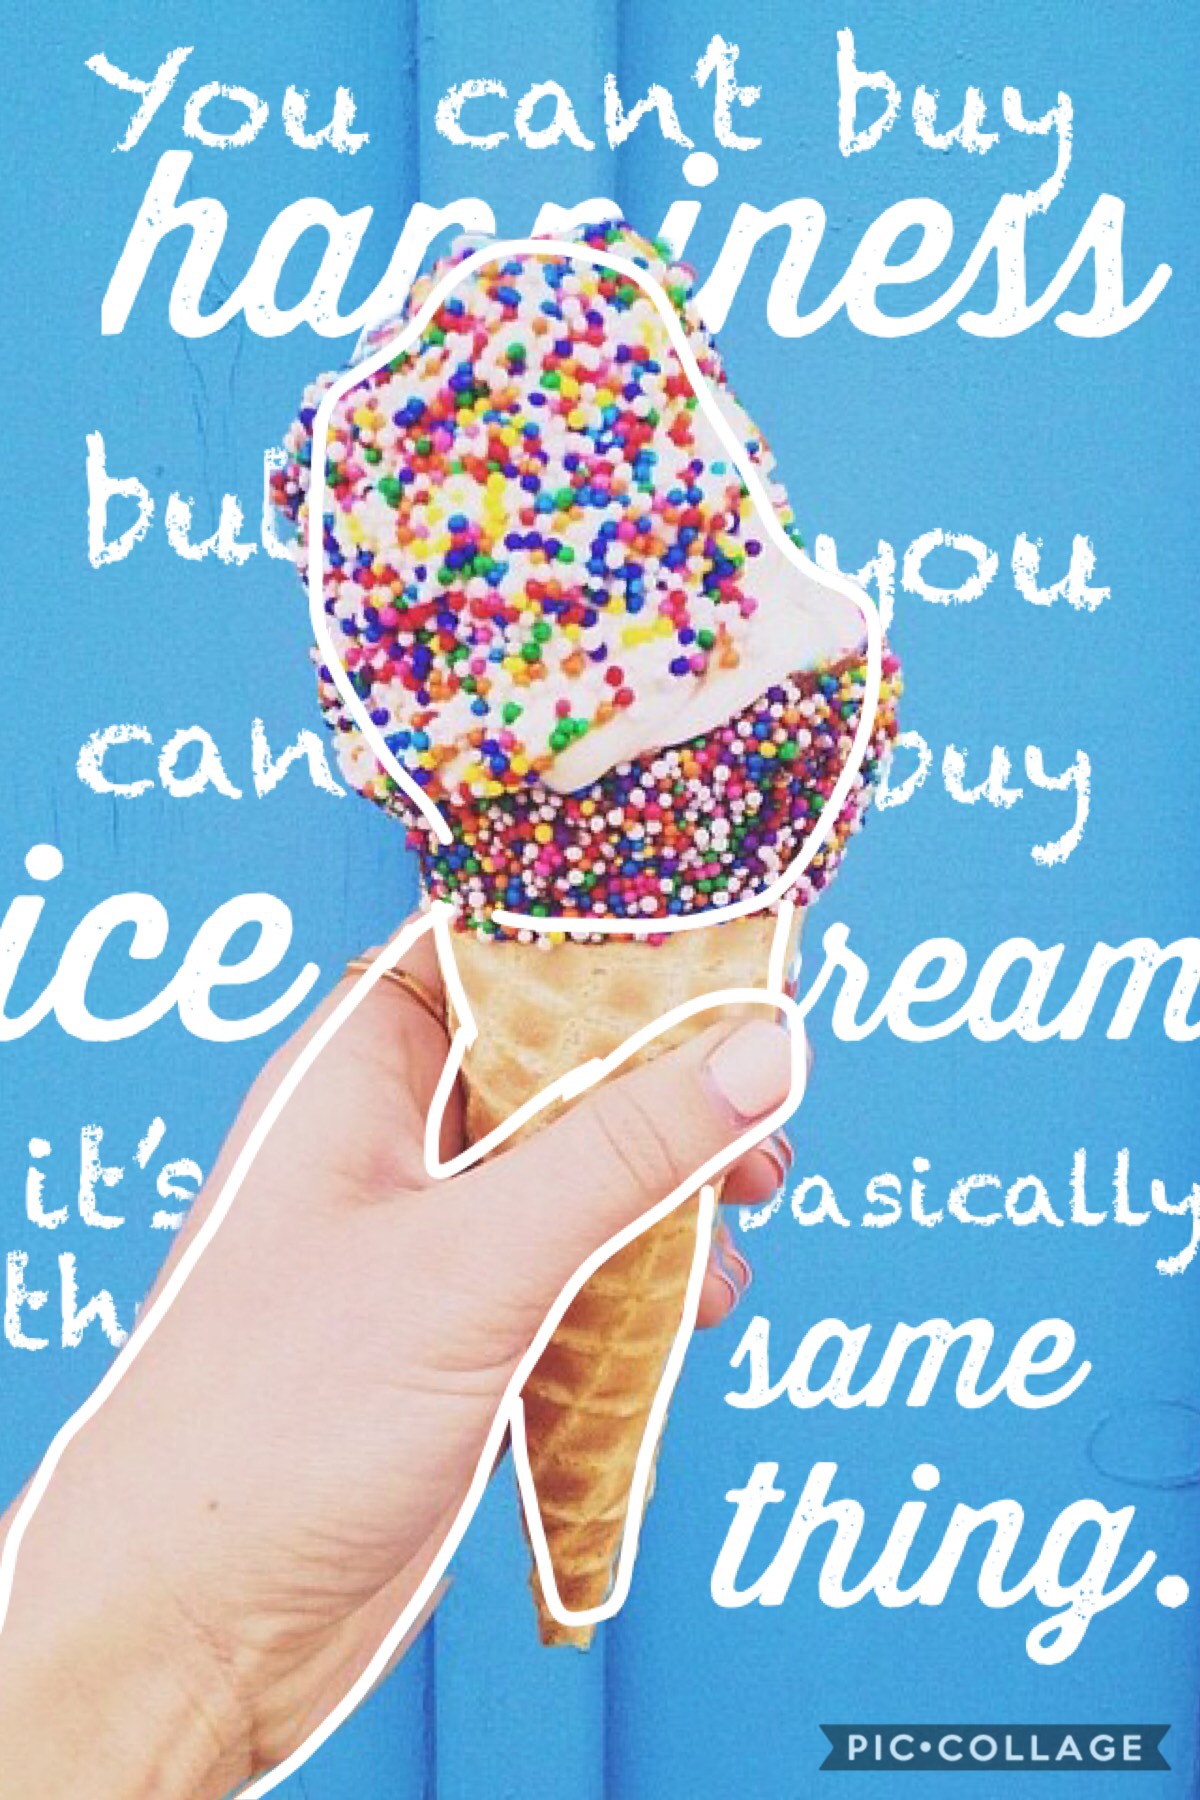 🍦Tap🍦
Don’t you just love ice cream? It’s probably one of my favourite foods. Do you have a favourite flavour?